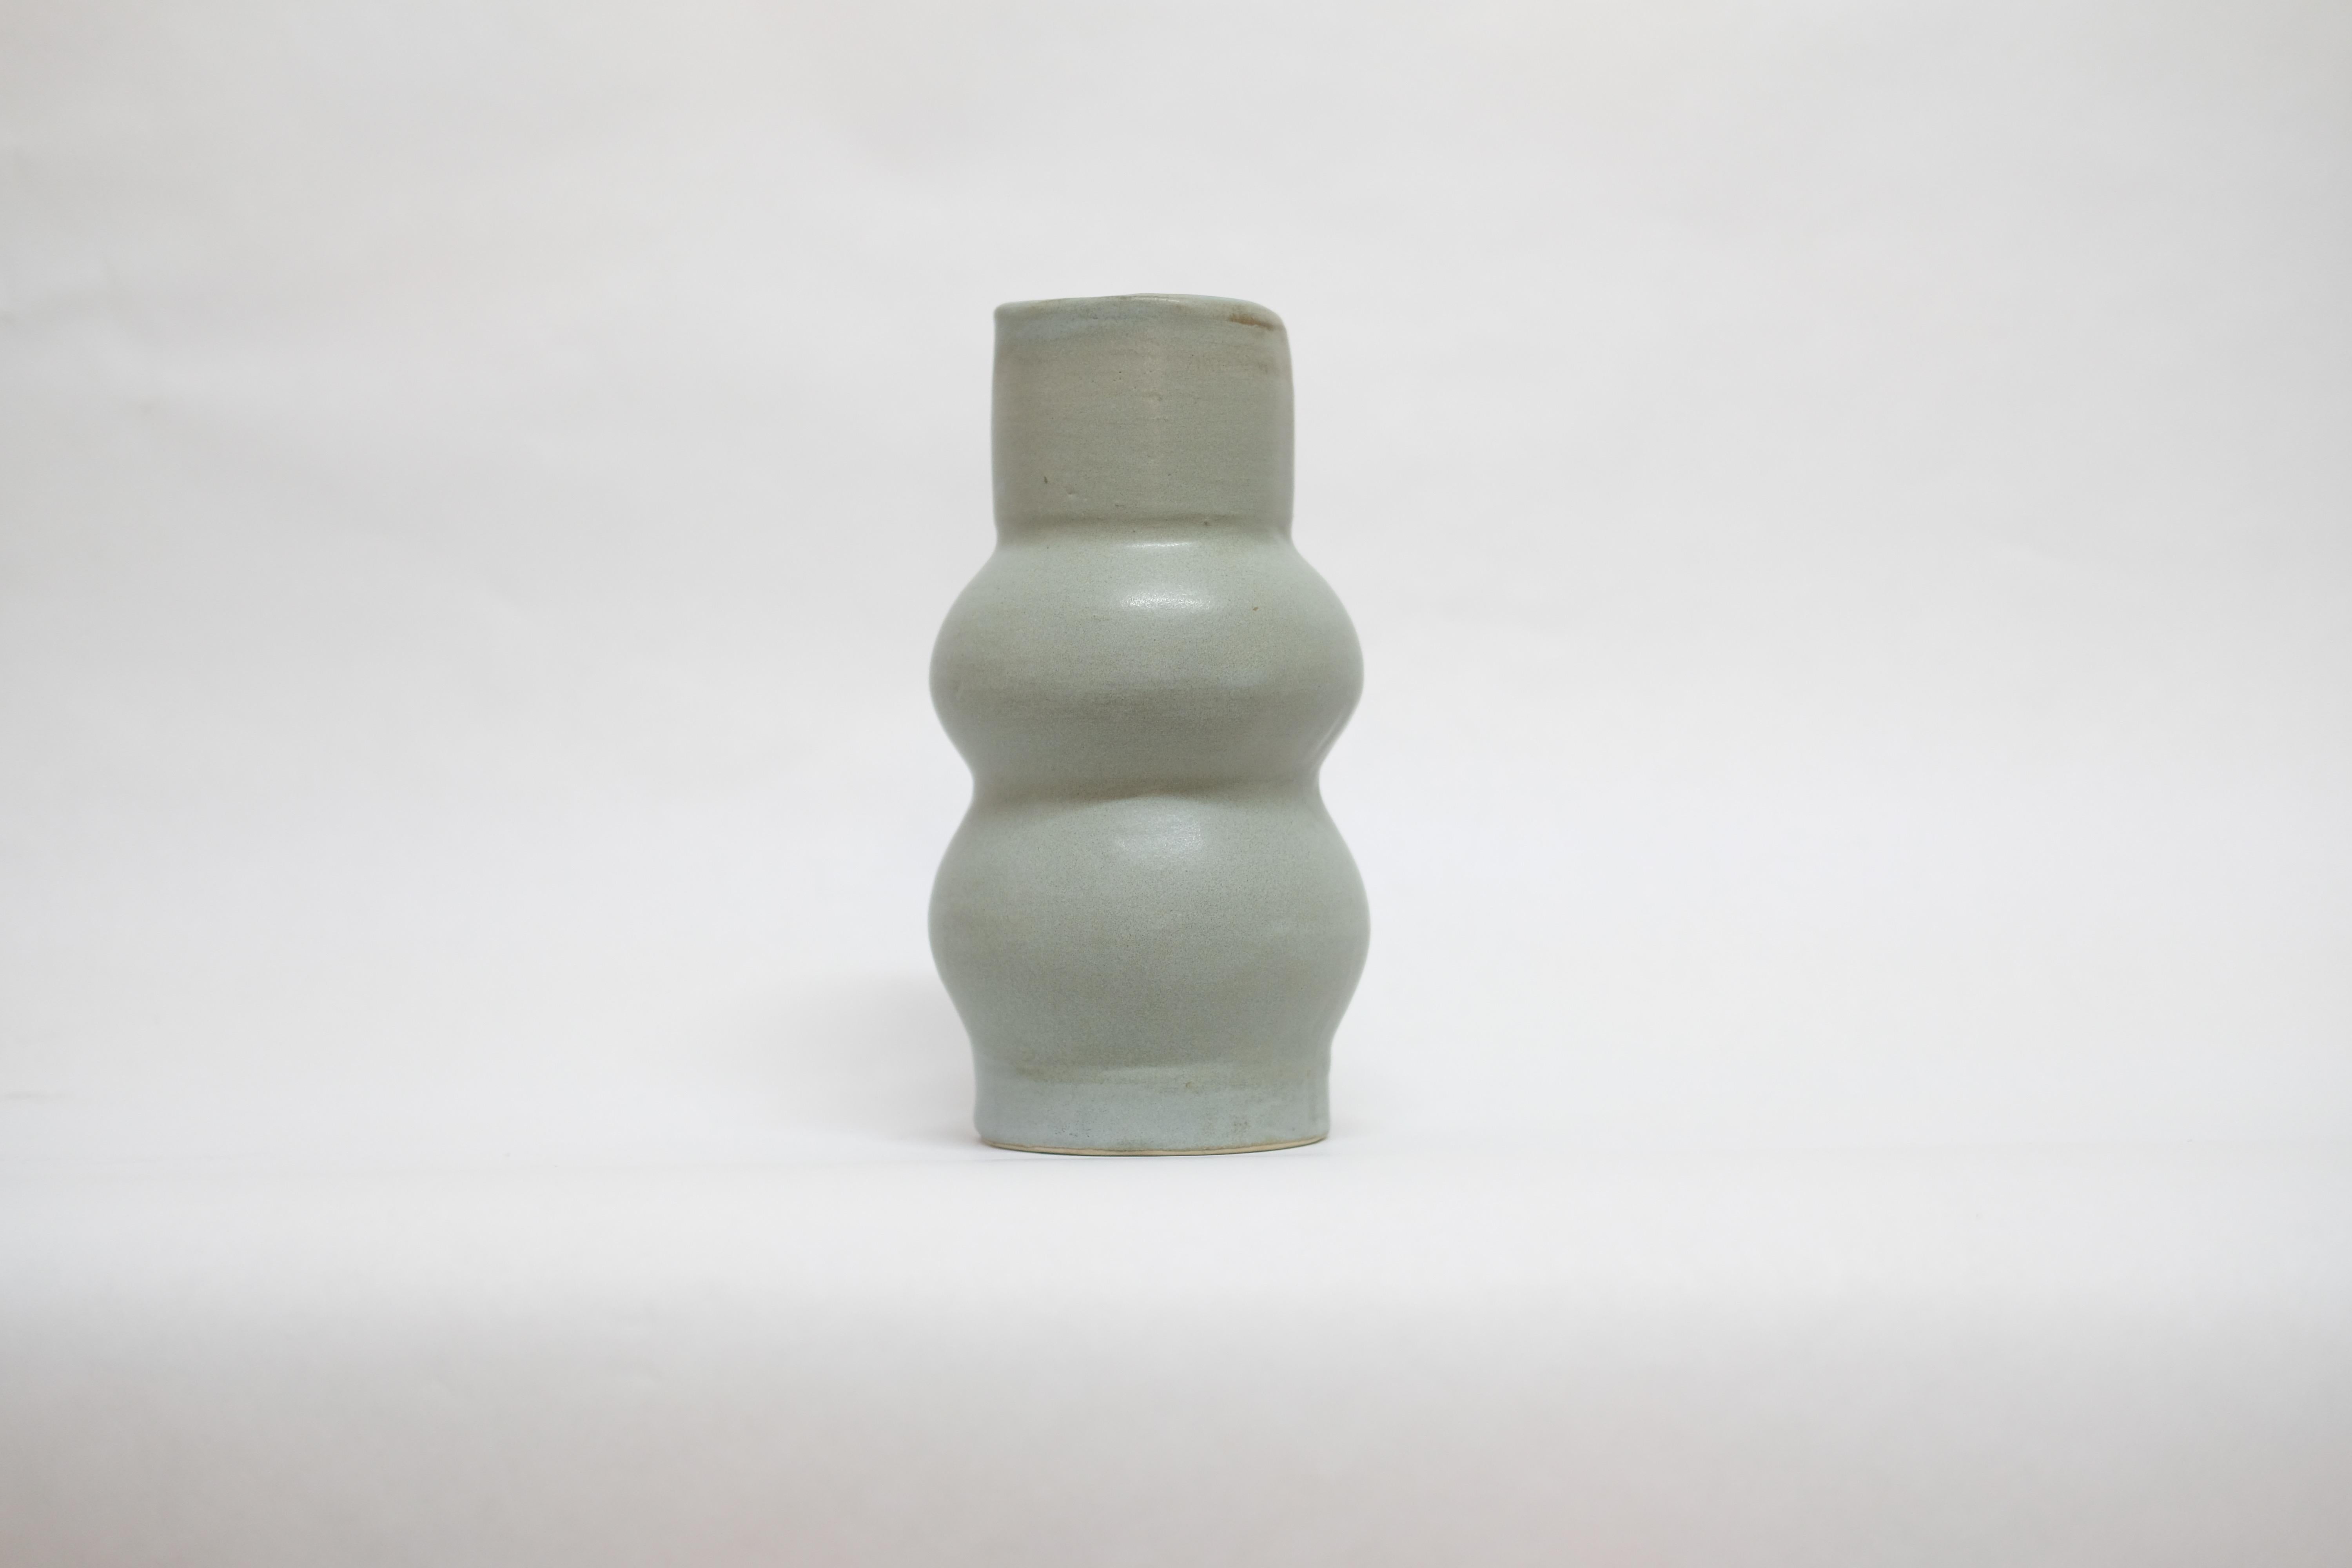 Unique stoneware vase femme II by Camila Apaez
Unique 
Materials: Stoneware
Dimensions: 8 x 8 x 22 cm

This year has been shaped by the topographies of our homes and the uncertainty of our time. We have found solace in the humbleness of silence and